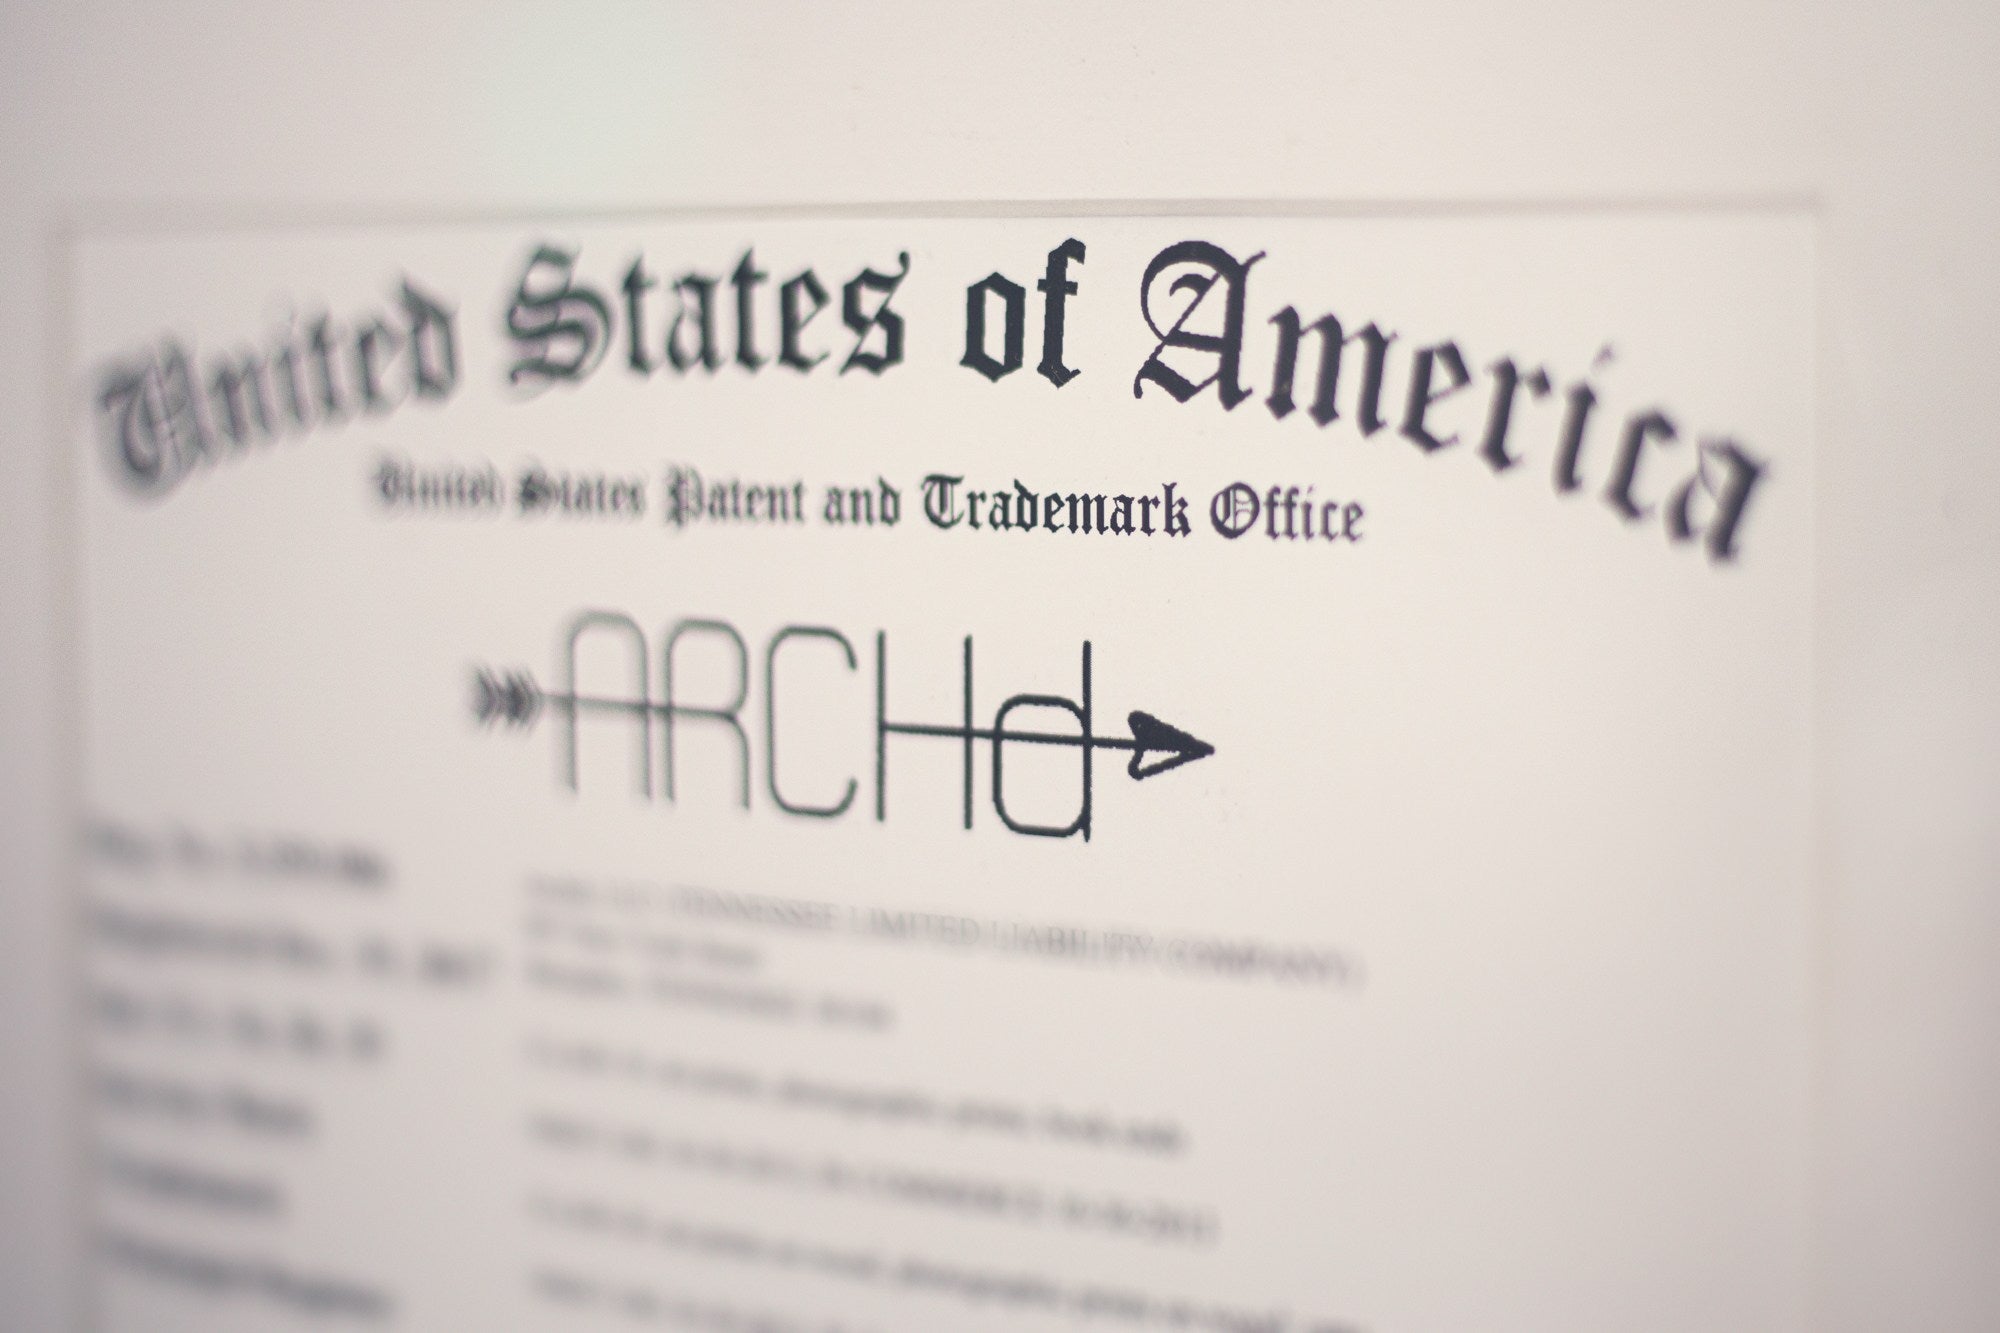 ARCHd United States Patent and Trademark Office certificate